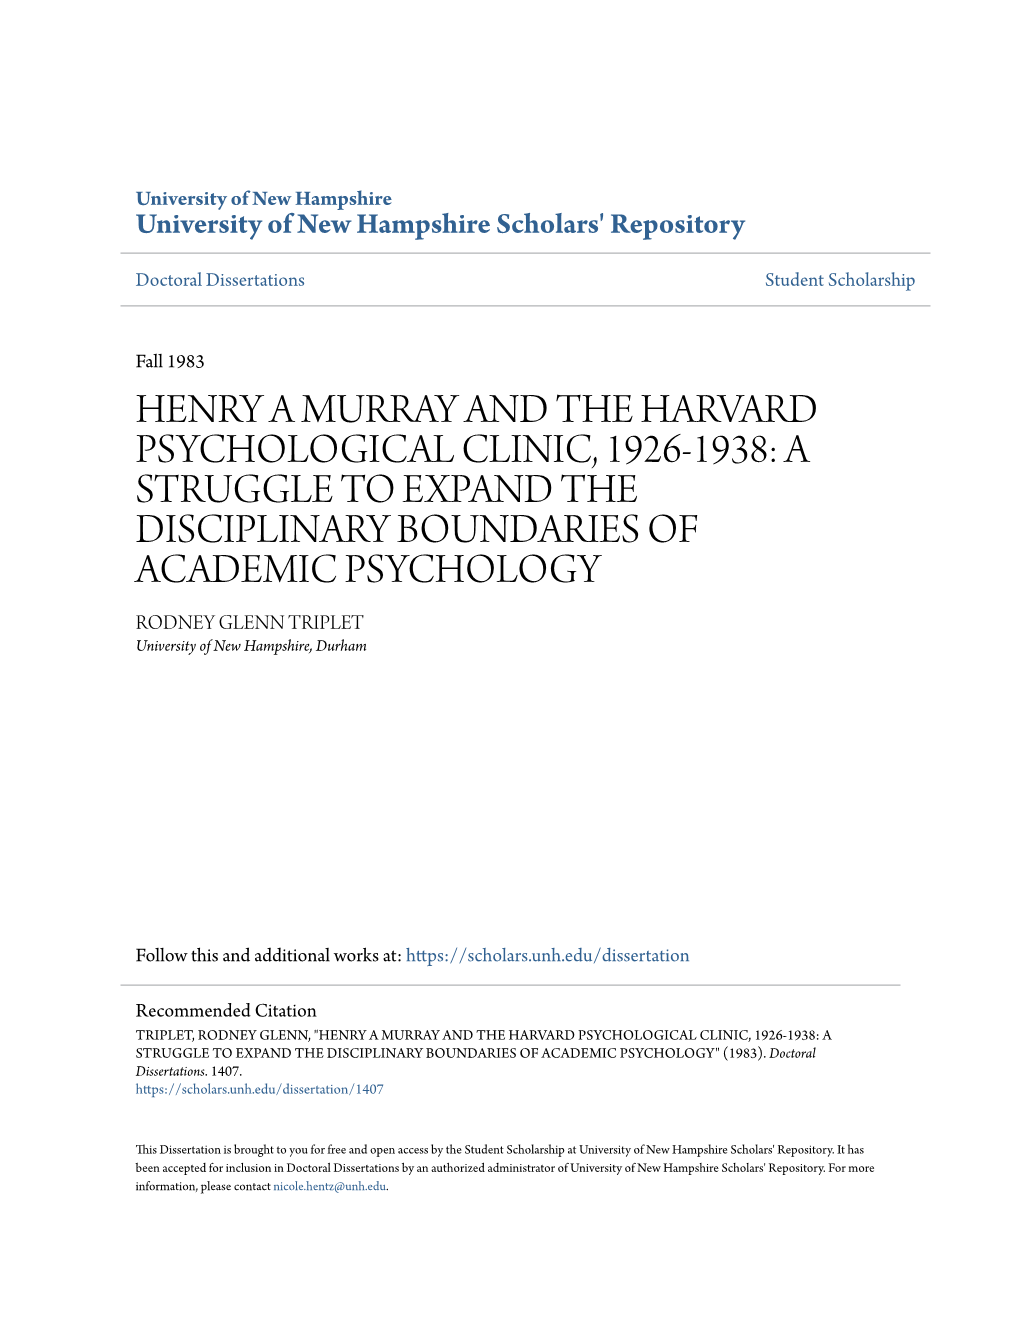 Henry a Murray and the Harvard